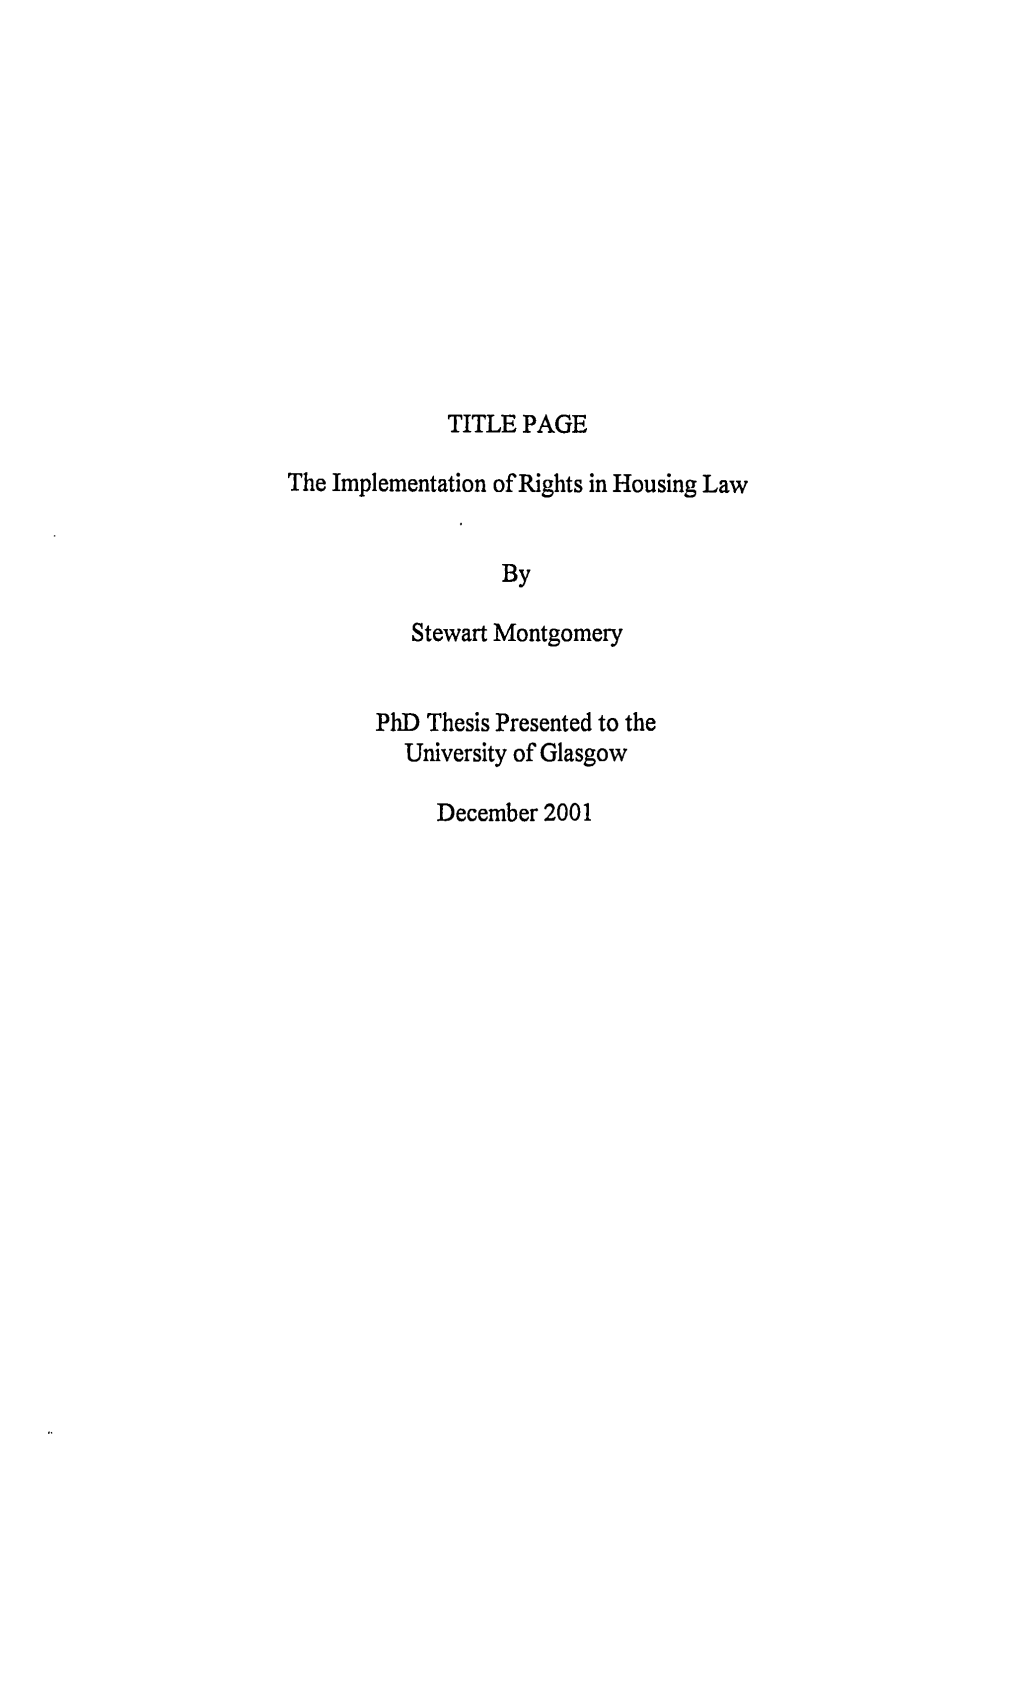 TITLE PAGE the Implementation of Rights in Housing Law by Stewart